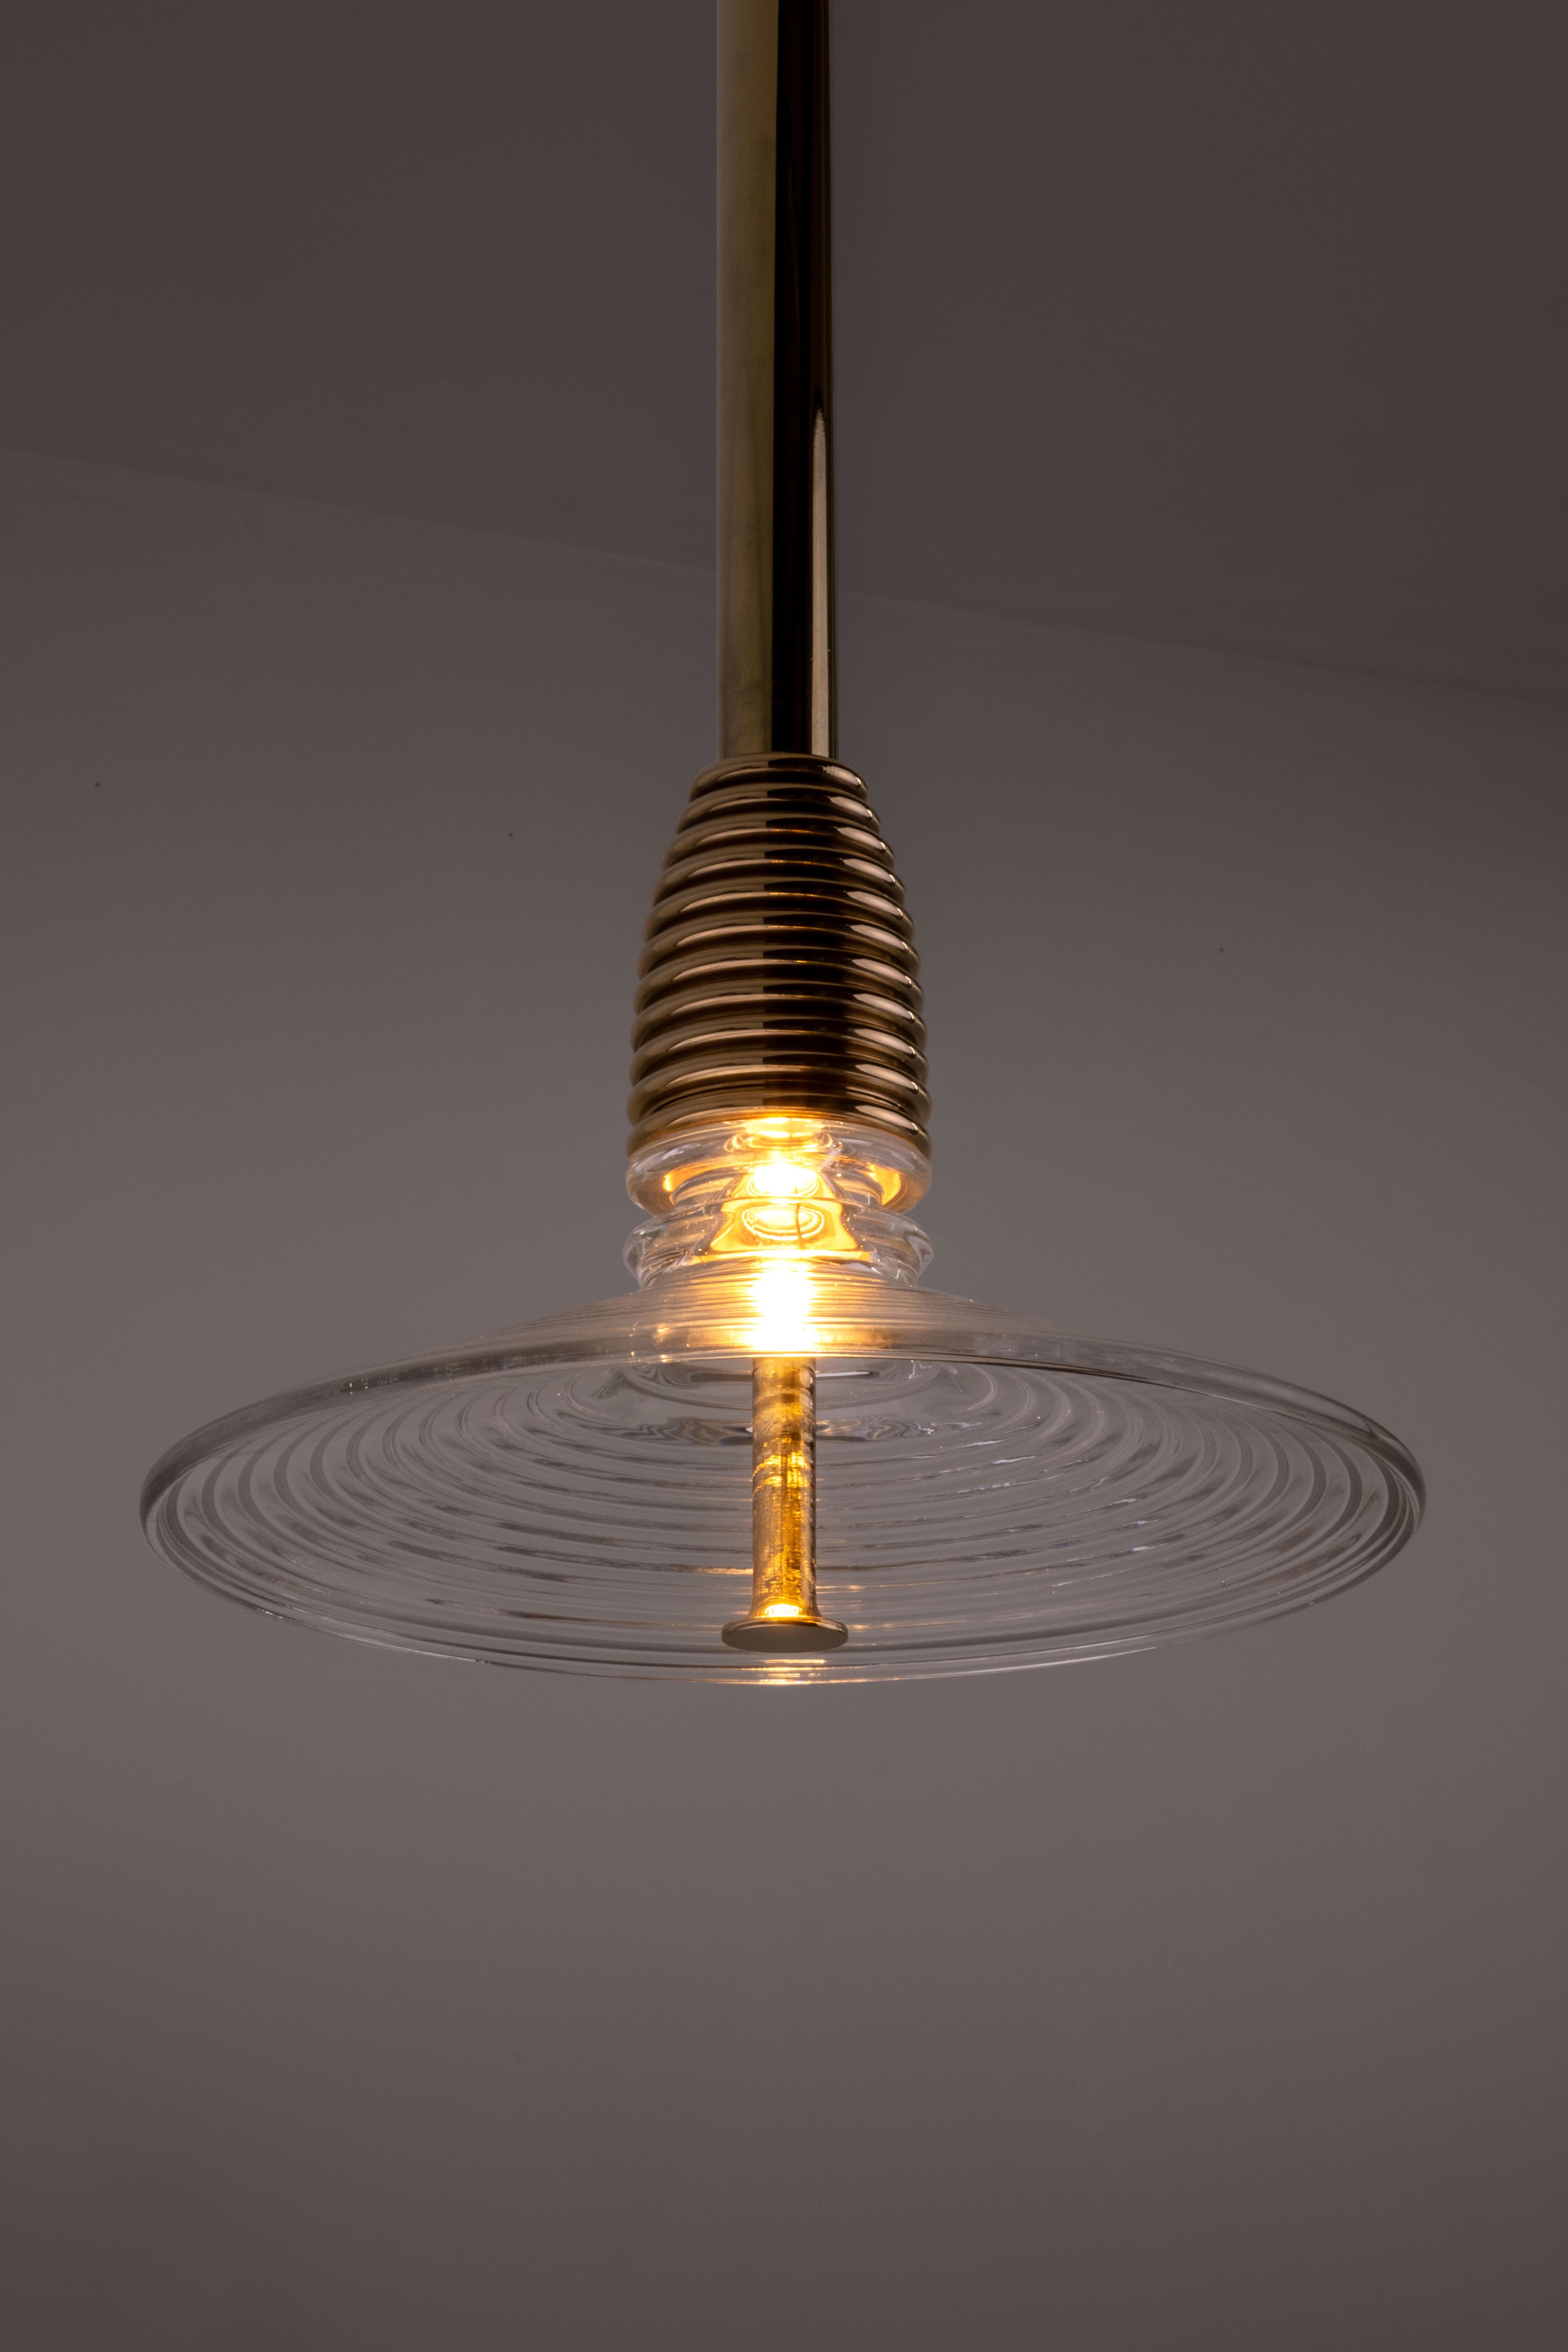 The Insulator 'B' Pendant in dark brass and clear glass by NOVOCASTRIAN deco For Sale 8